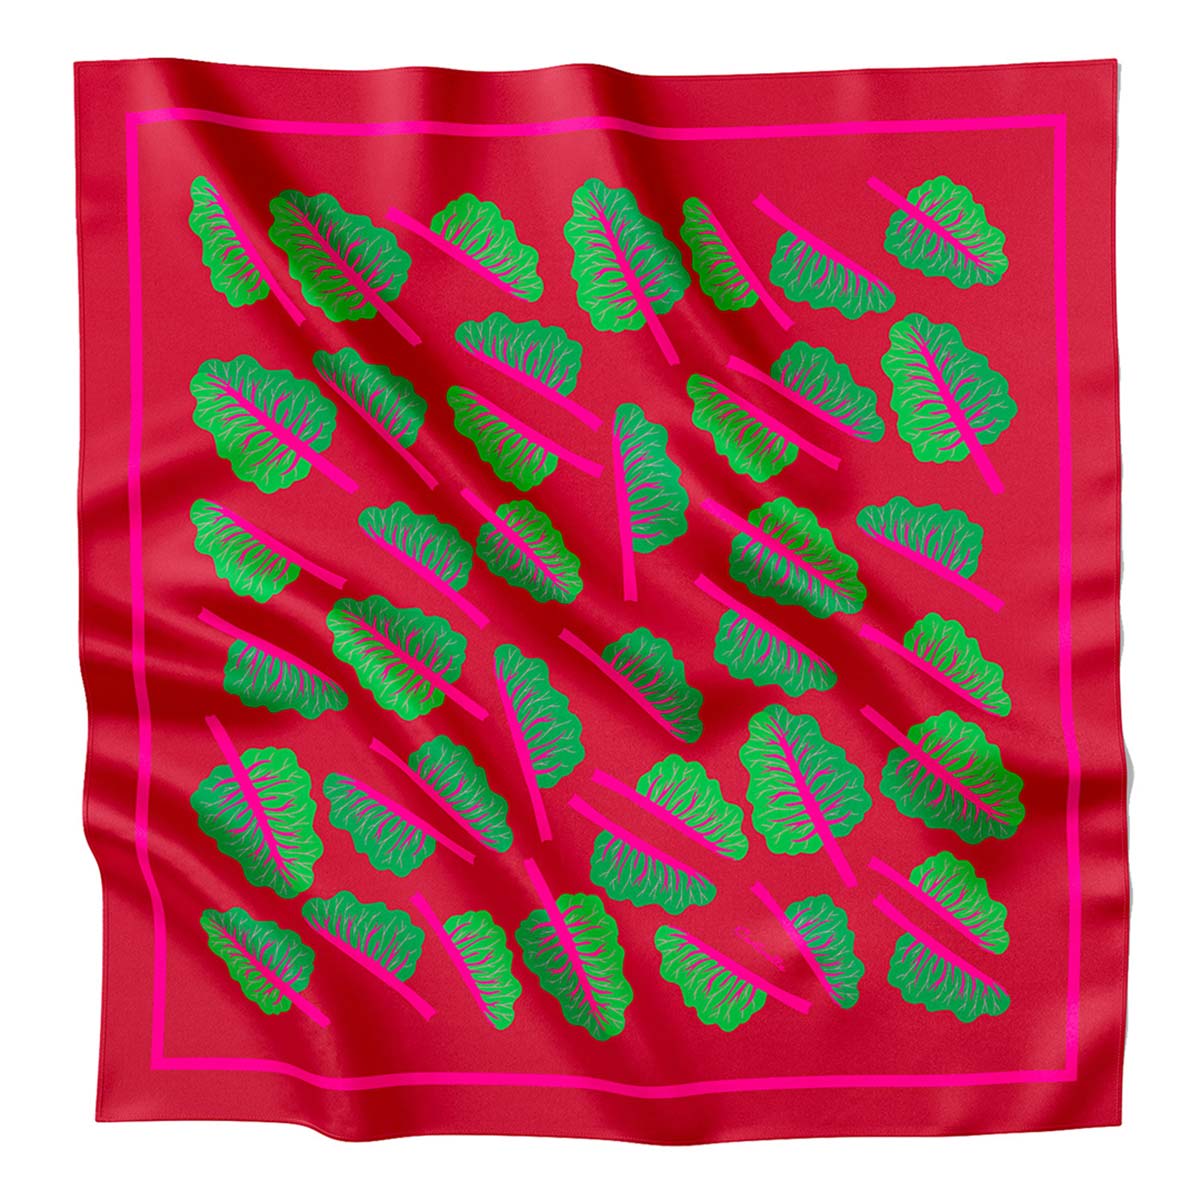 Red silk scarf with green chard and hot pink details